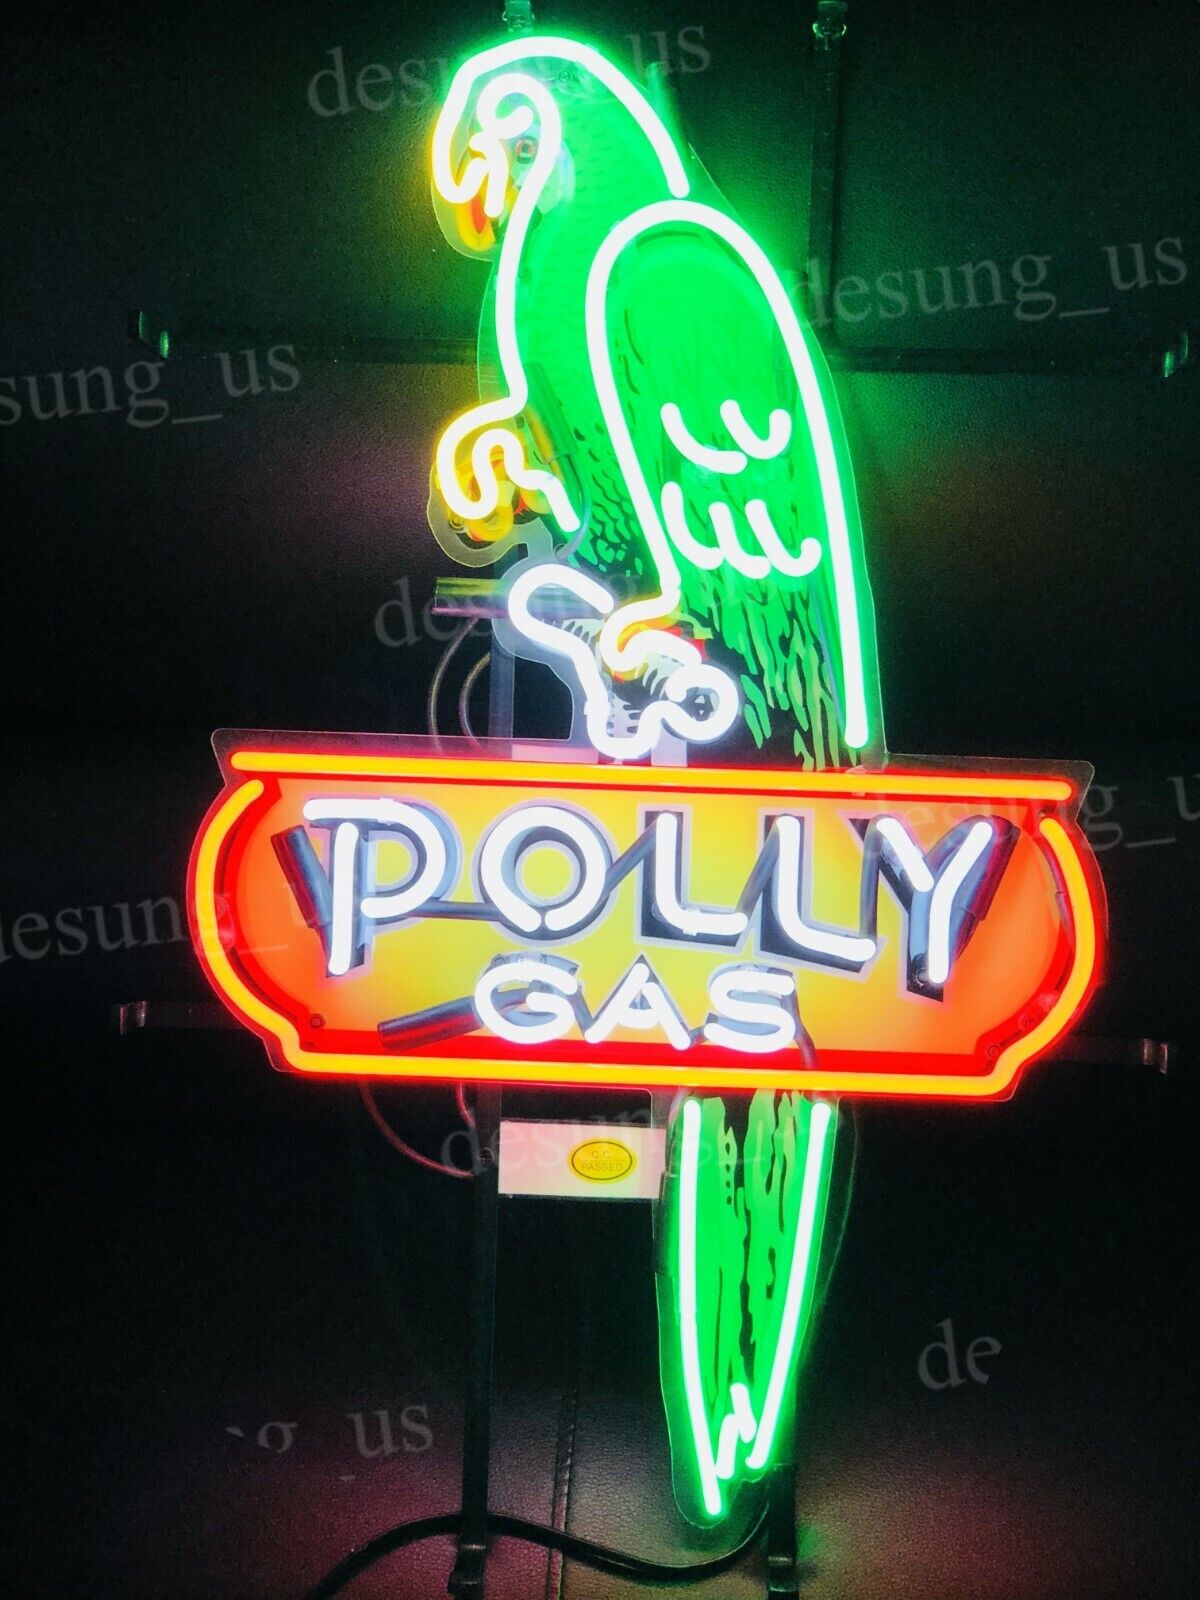 New Polly Gas Gasoline Oil Lamp Neon Light Sign 20\